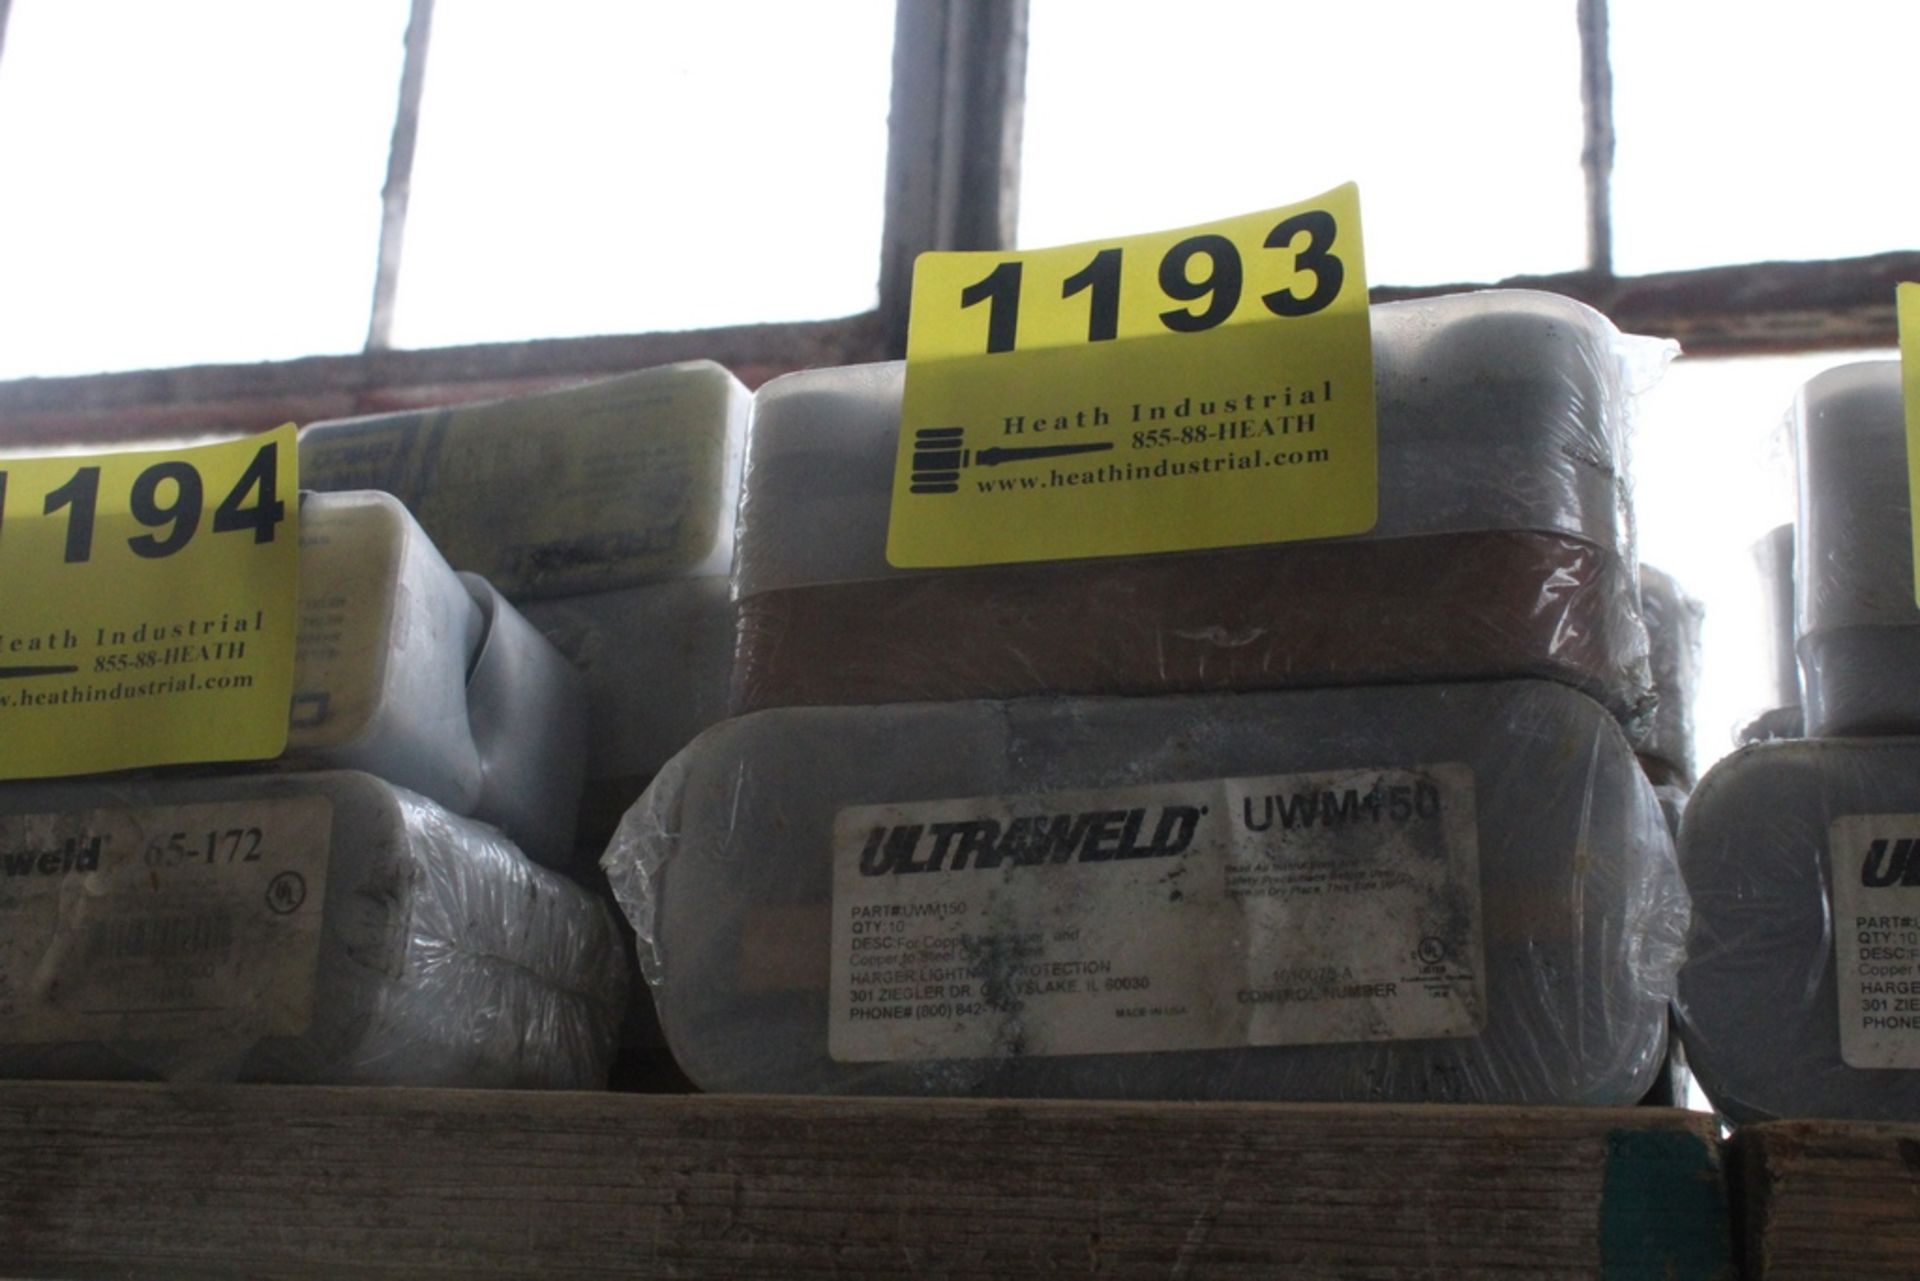 (5) CONTAINERS OF CADWELD WELDING MATERIAL